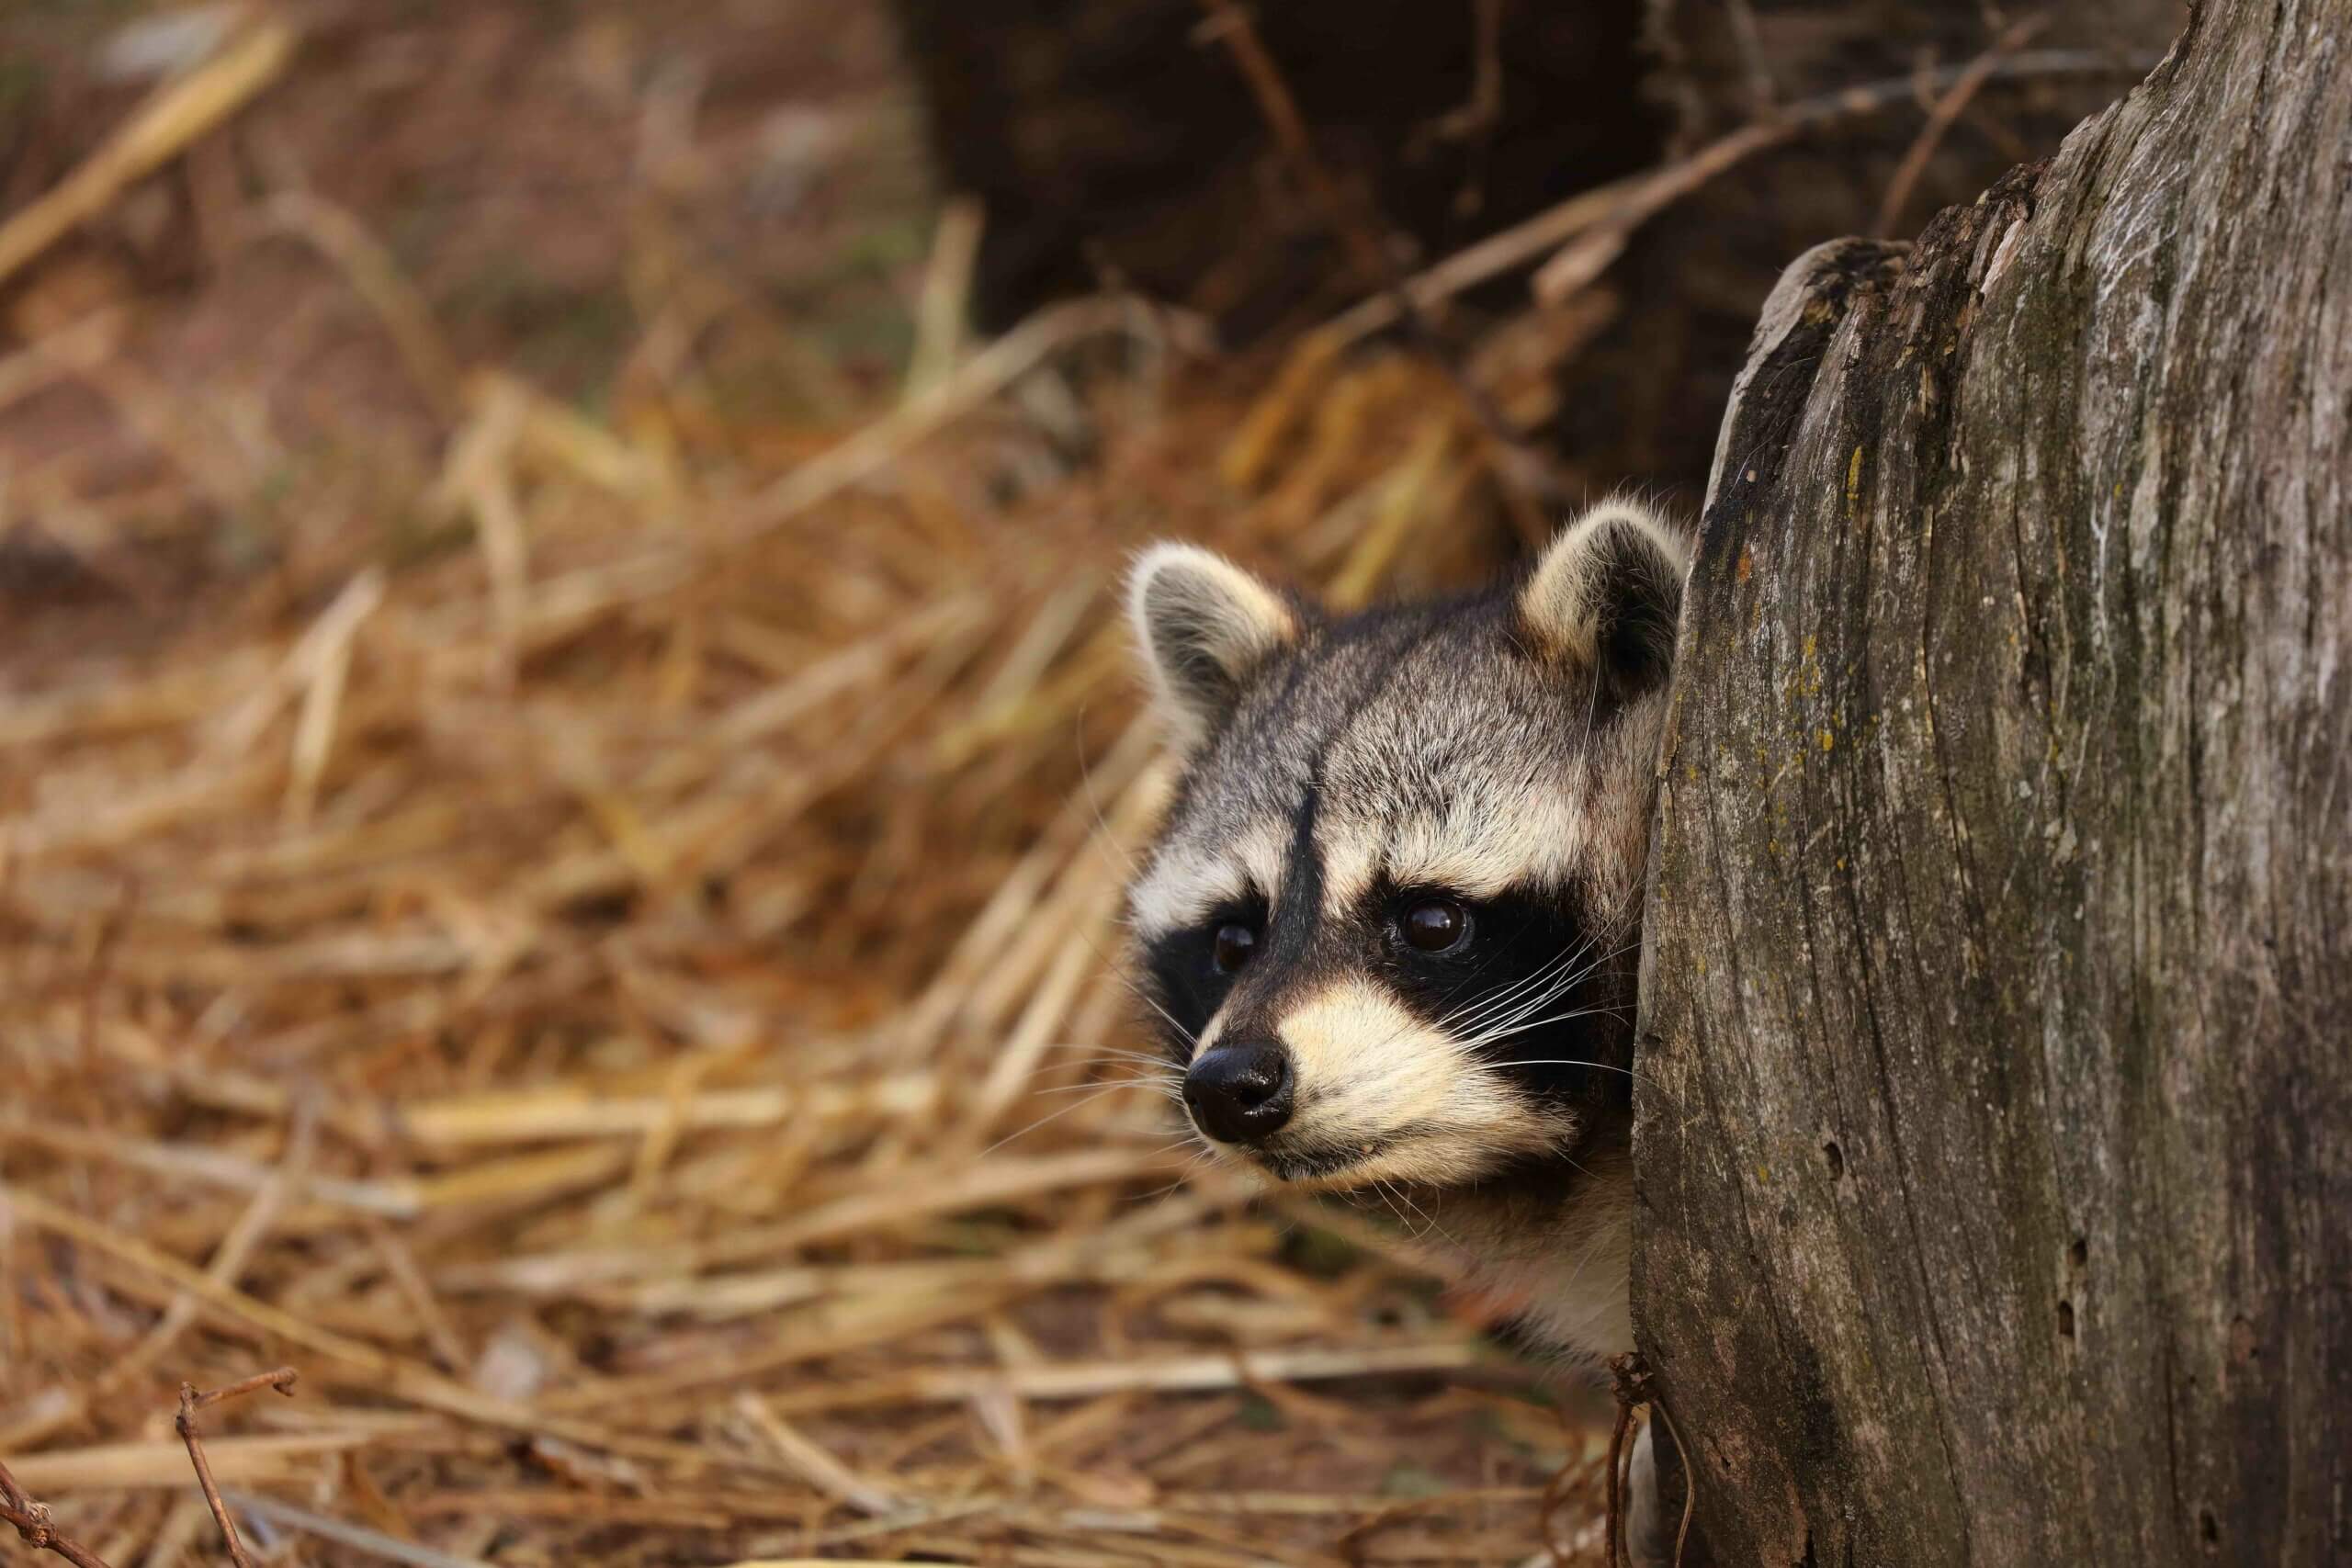 A racoon peeking out from behind a tree stump.